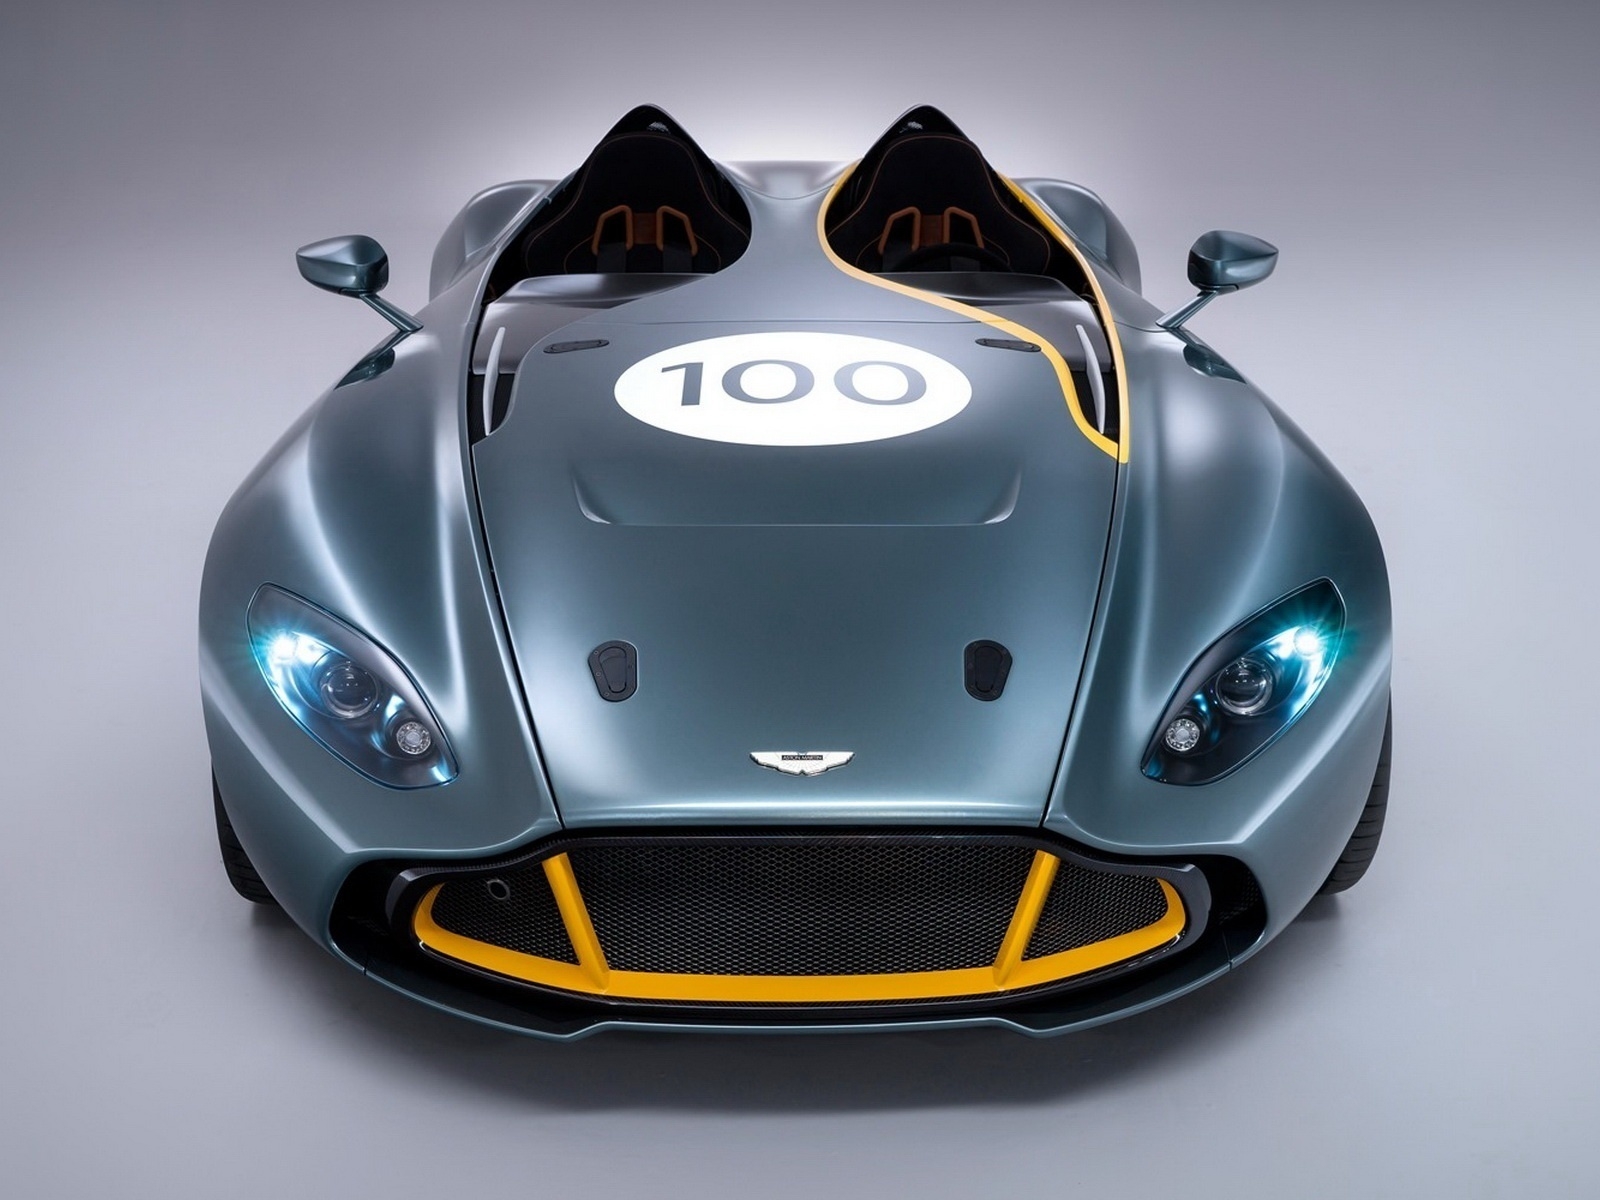 Aston Martin CC100 Speedster Front View for 1600 x 1200 resolution